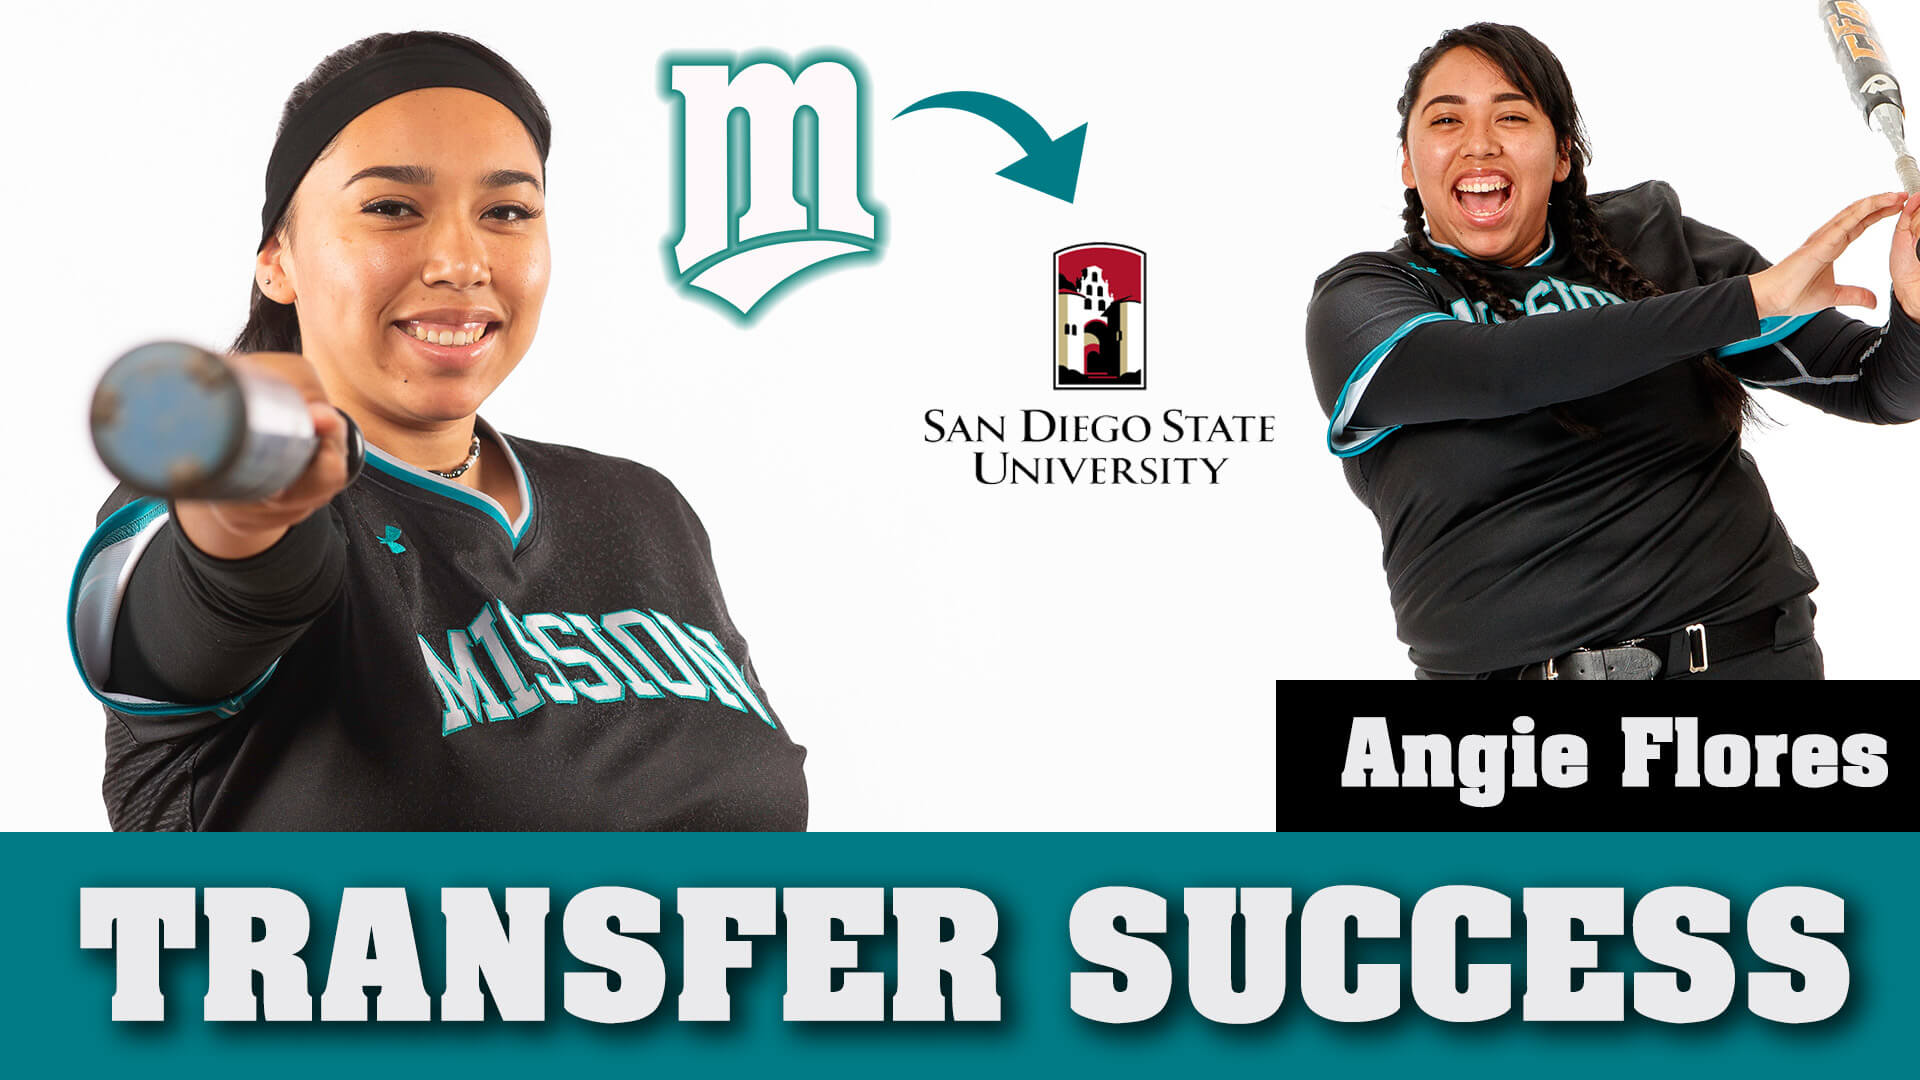 Angie Flores will transfer to San Diego State